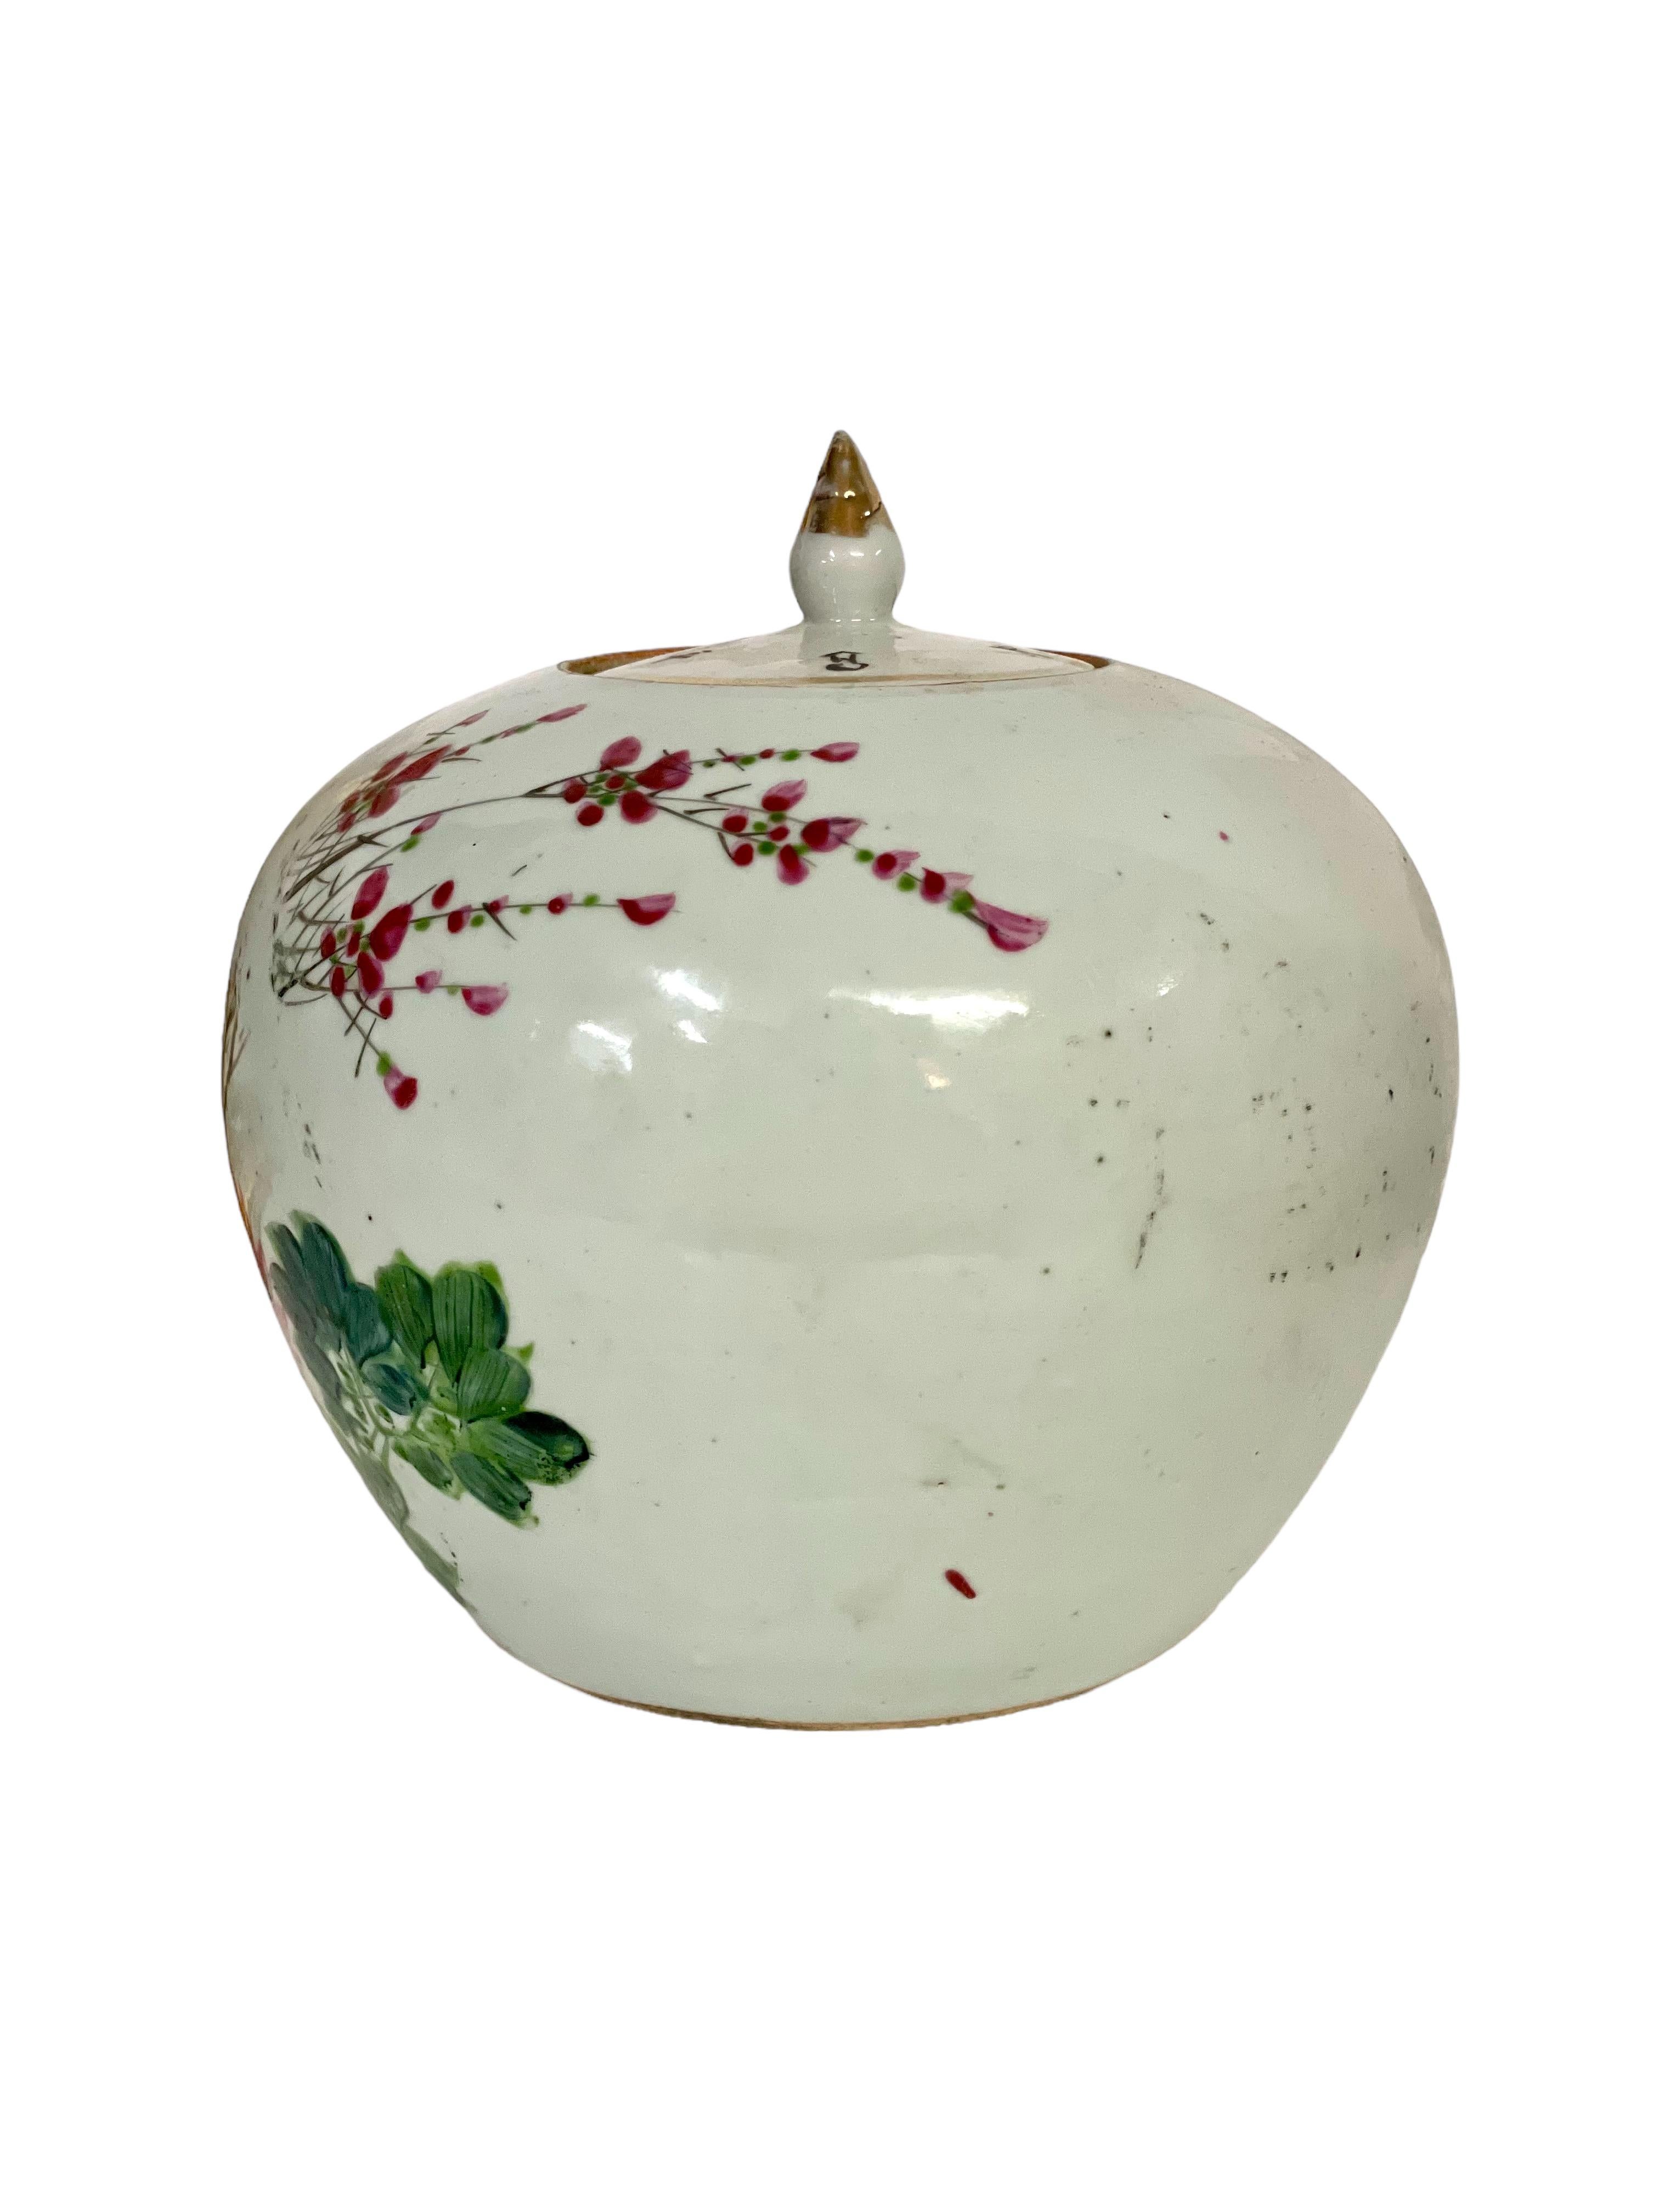 This vintage Chinese porcelain ginger jar, with its close-fitting lid, is beautifully decorated in the traditional 'famille rose' colour palette of pinks, whites, yellows and greens, as classified by French art historian Albert Jacquemart, who